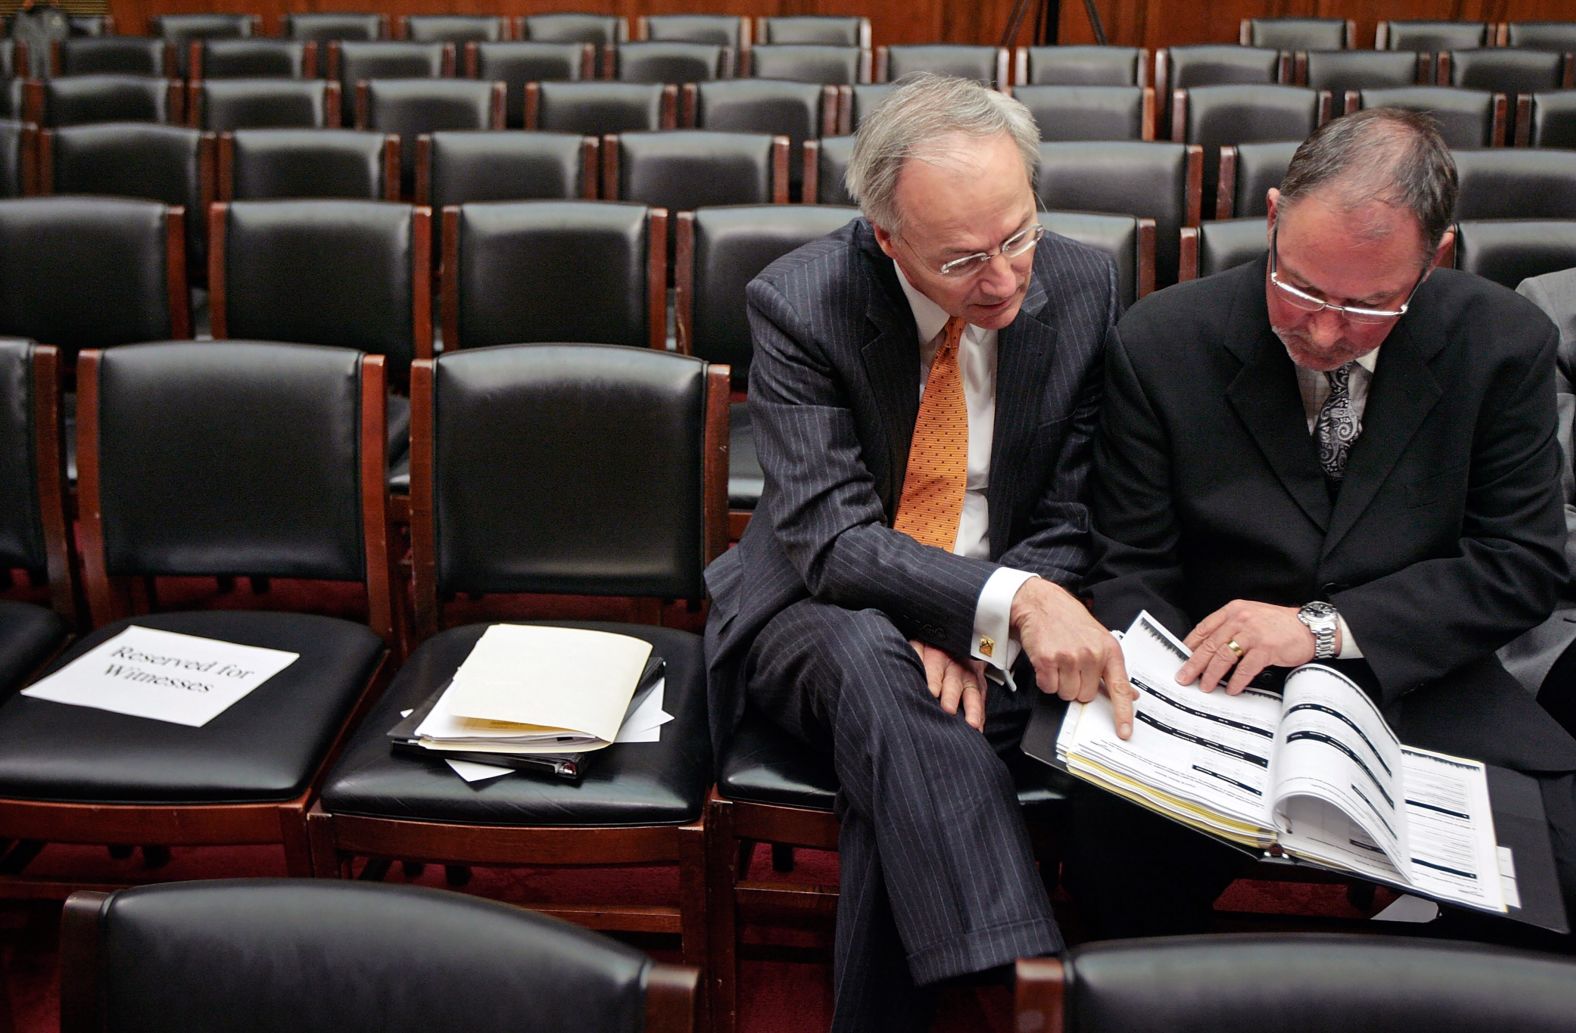 Hutchinson, left, consults with Westland/Hallmark Meat Co. CEO Steven Mendell as Mendell prepares to testify before the House Energy and Commerce Committee in 2008.